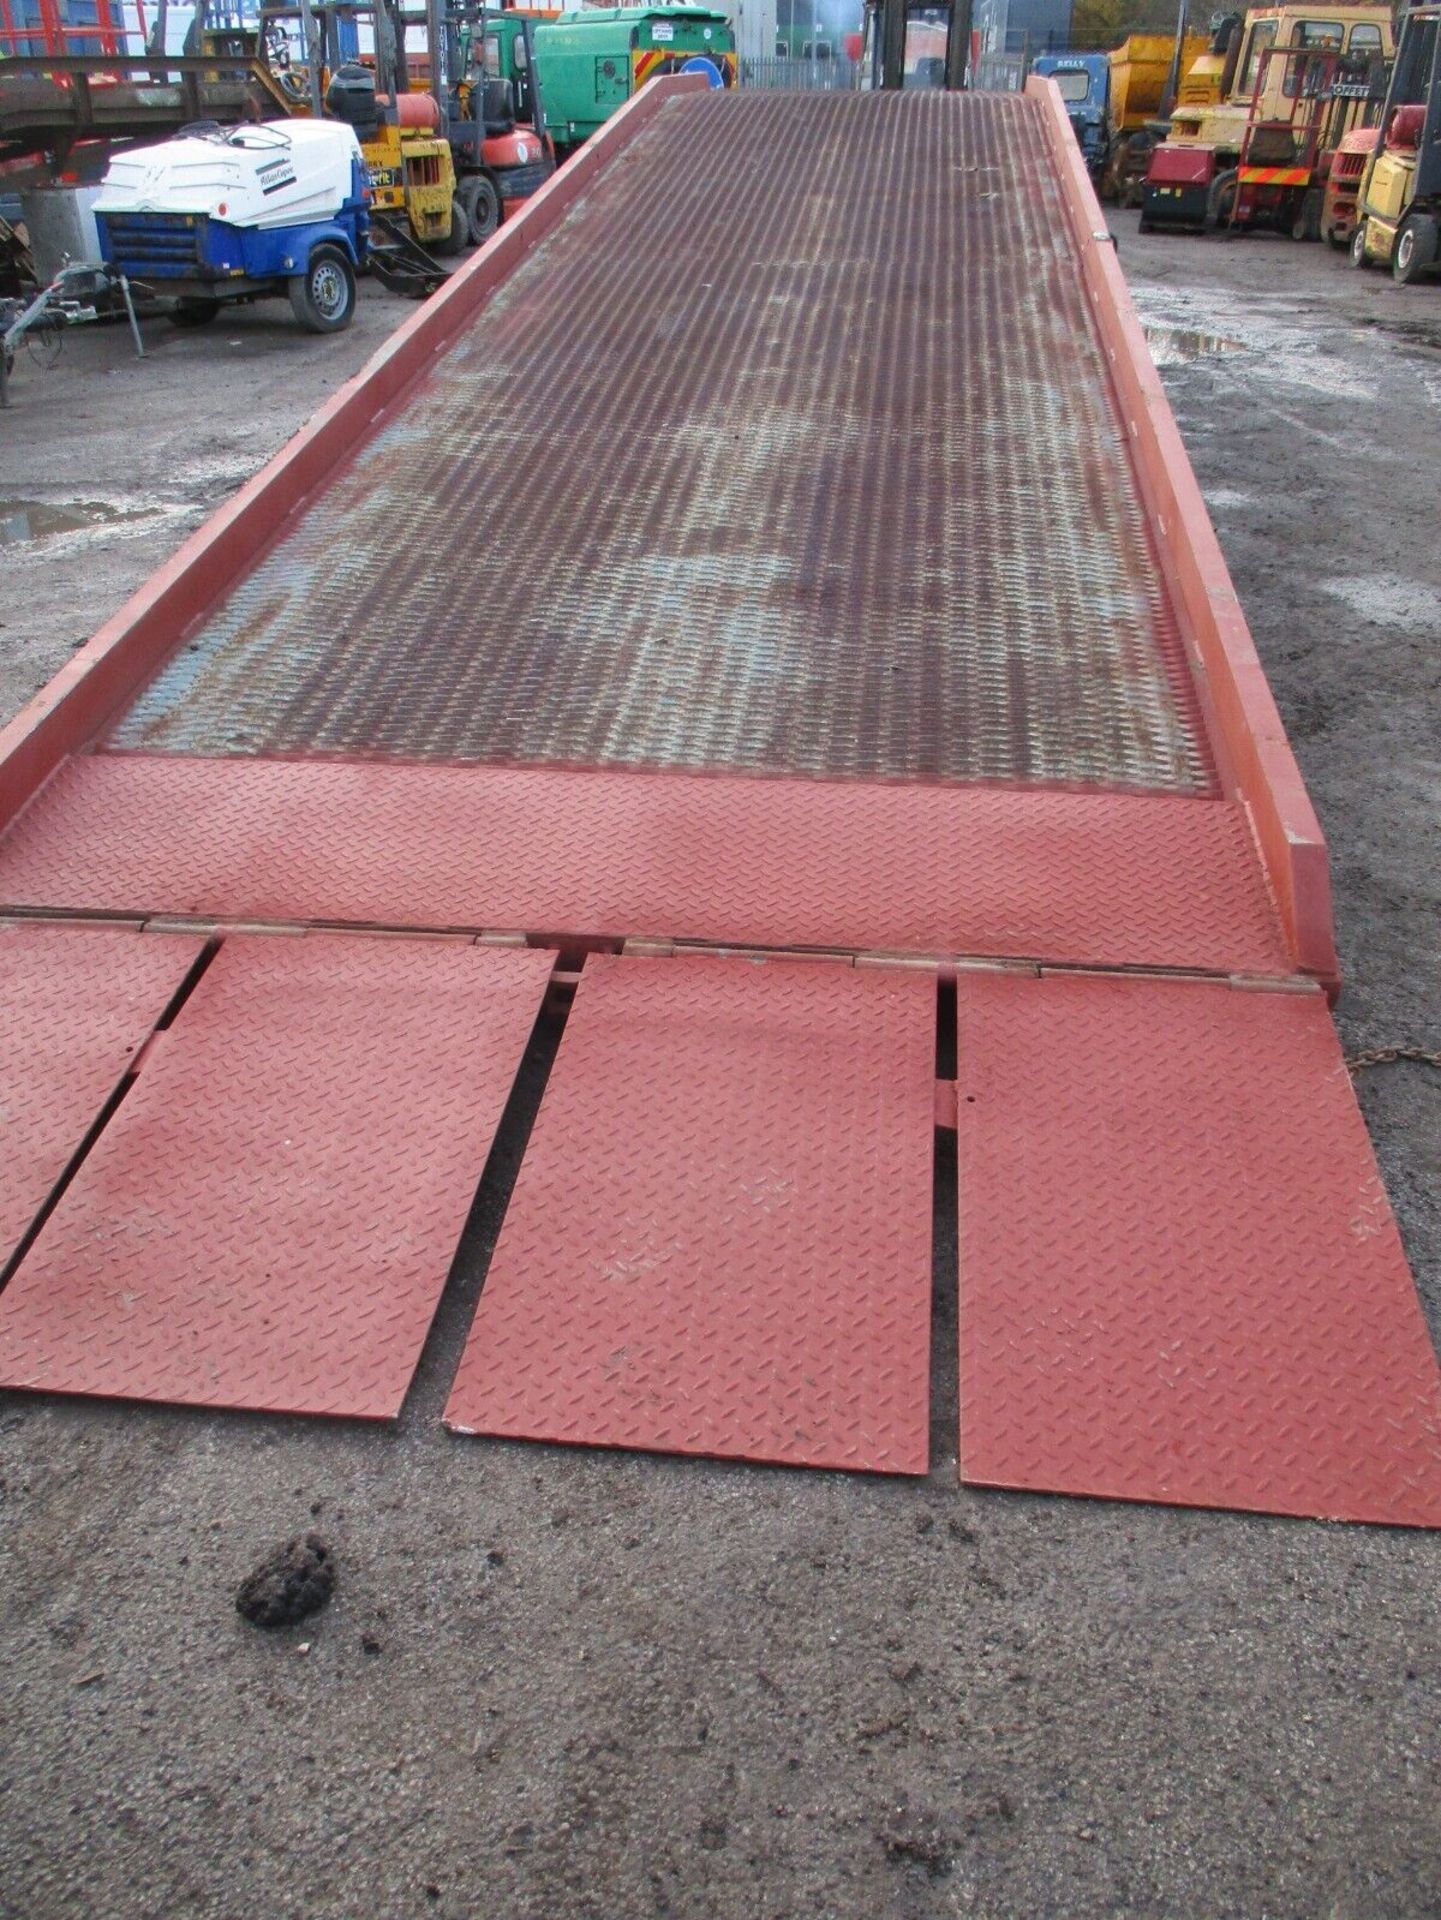 12 METRES LONG THORWORLD CONTAINER LOADING RAMP - Image 5 of 11